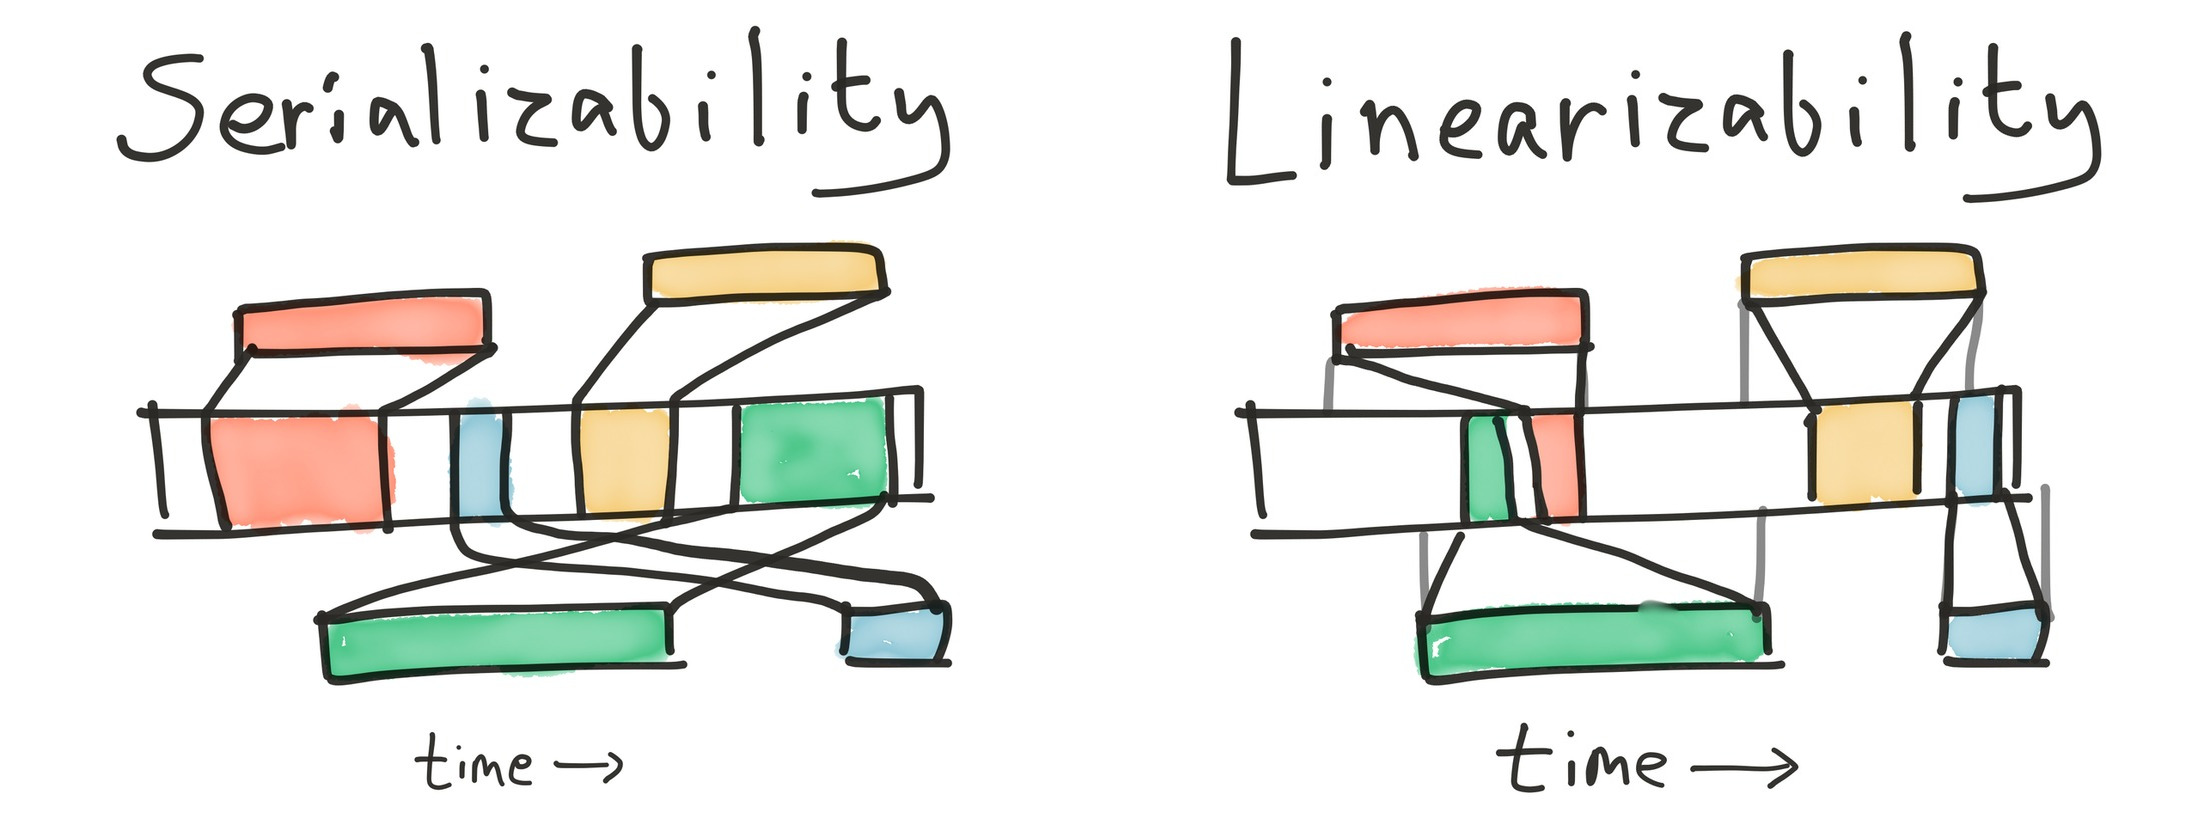 Serializability allows transactions to occur at any logical time, whereas linearizability requires that operations occur between their invocation and completion times